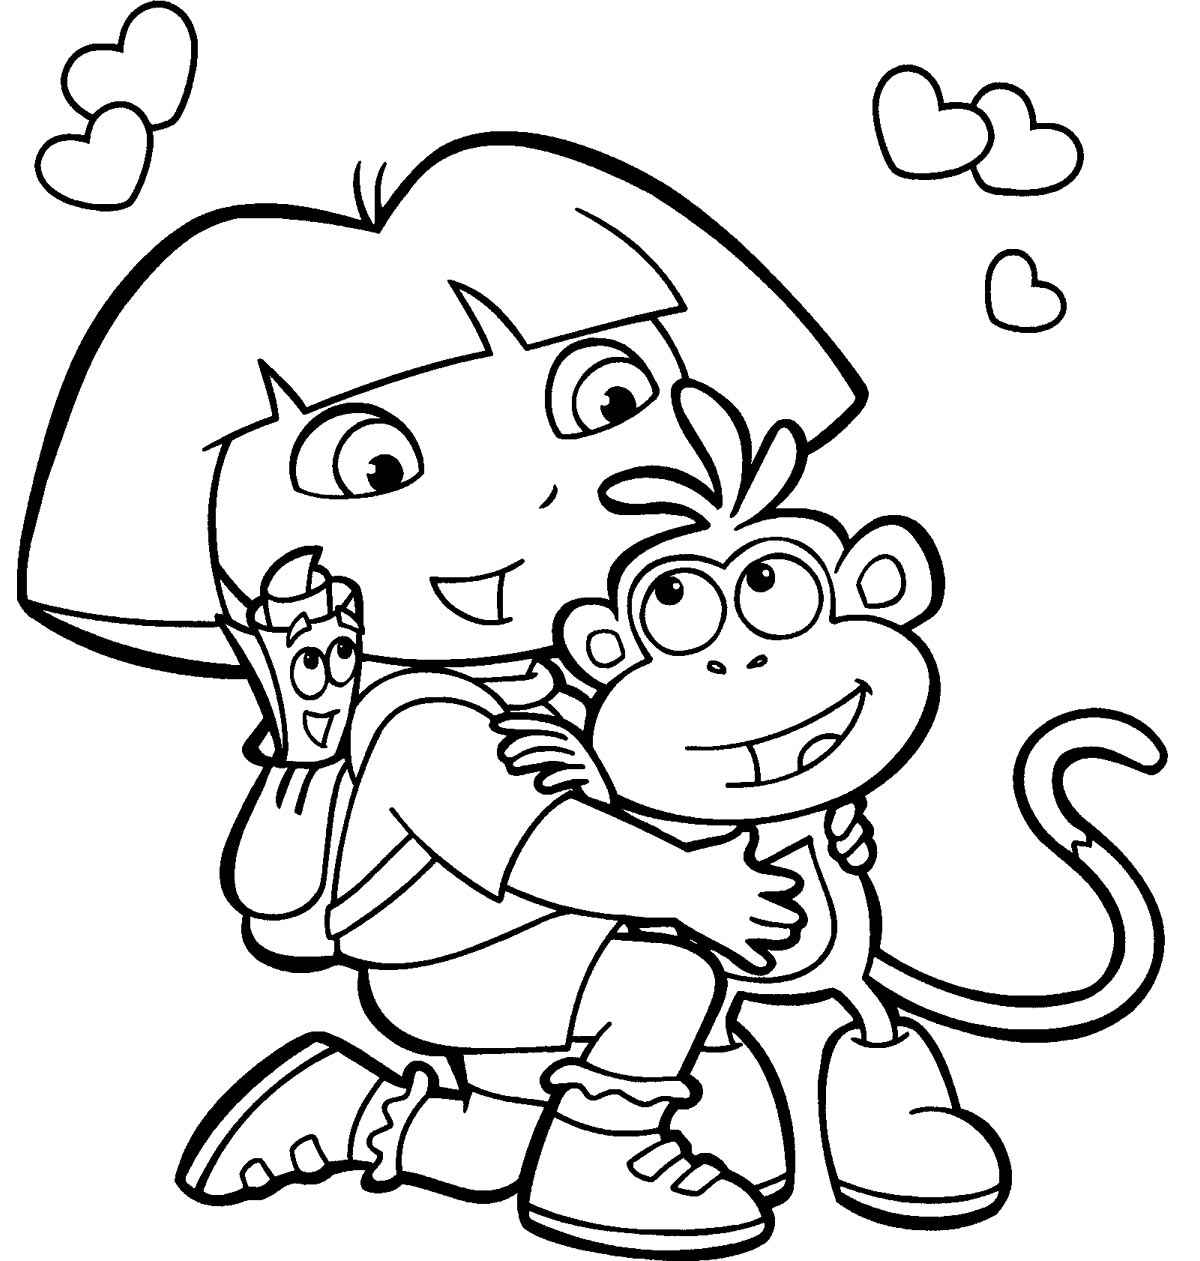 Dora Coloring Pages   Free Printable Coloring Pages   Coloring Home